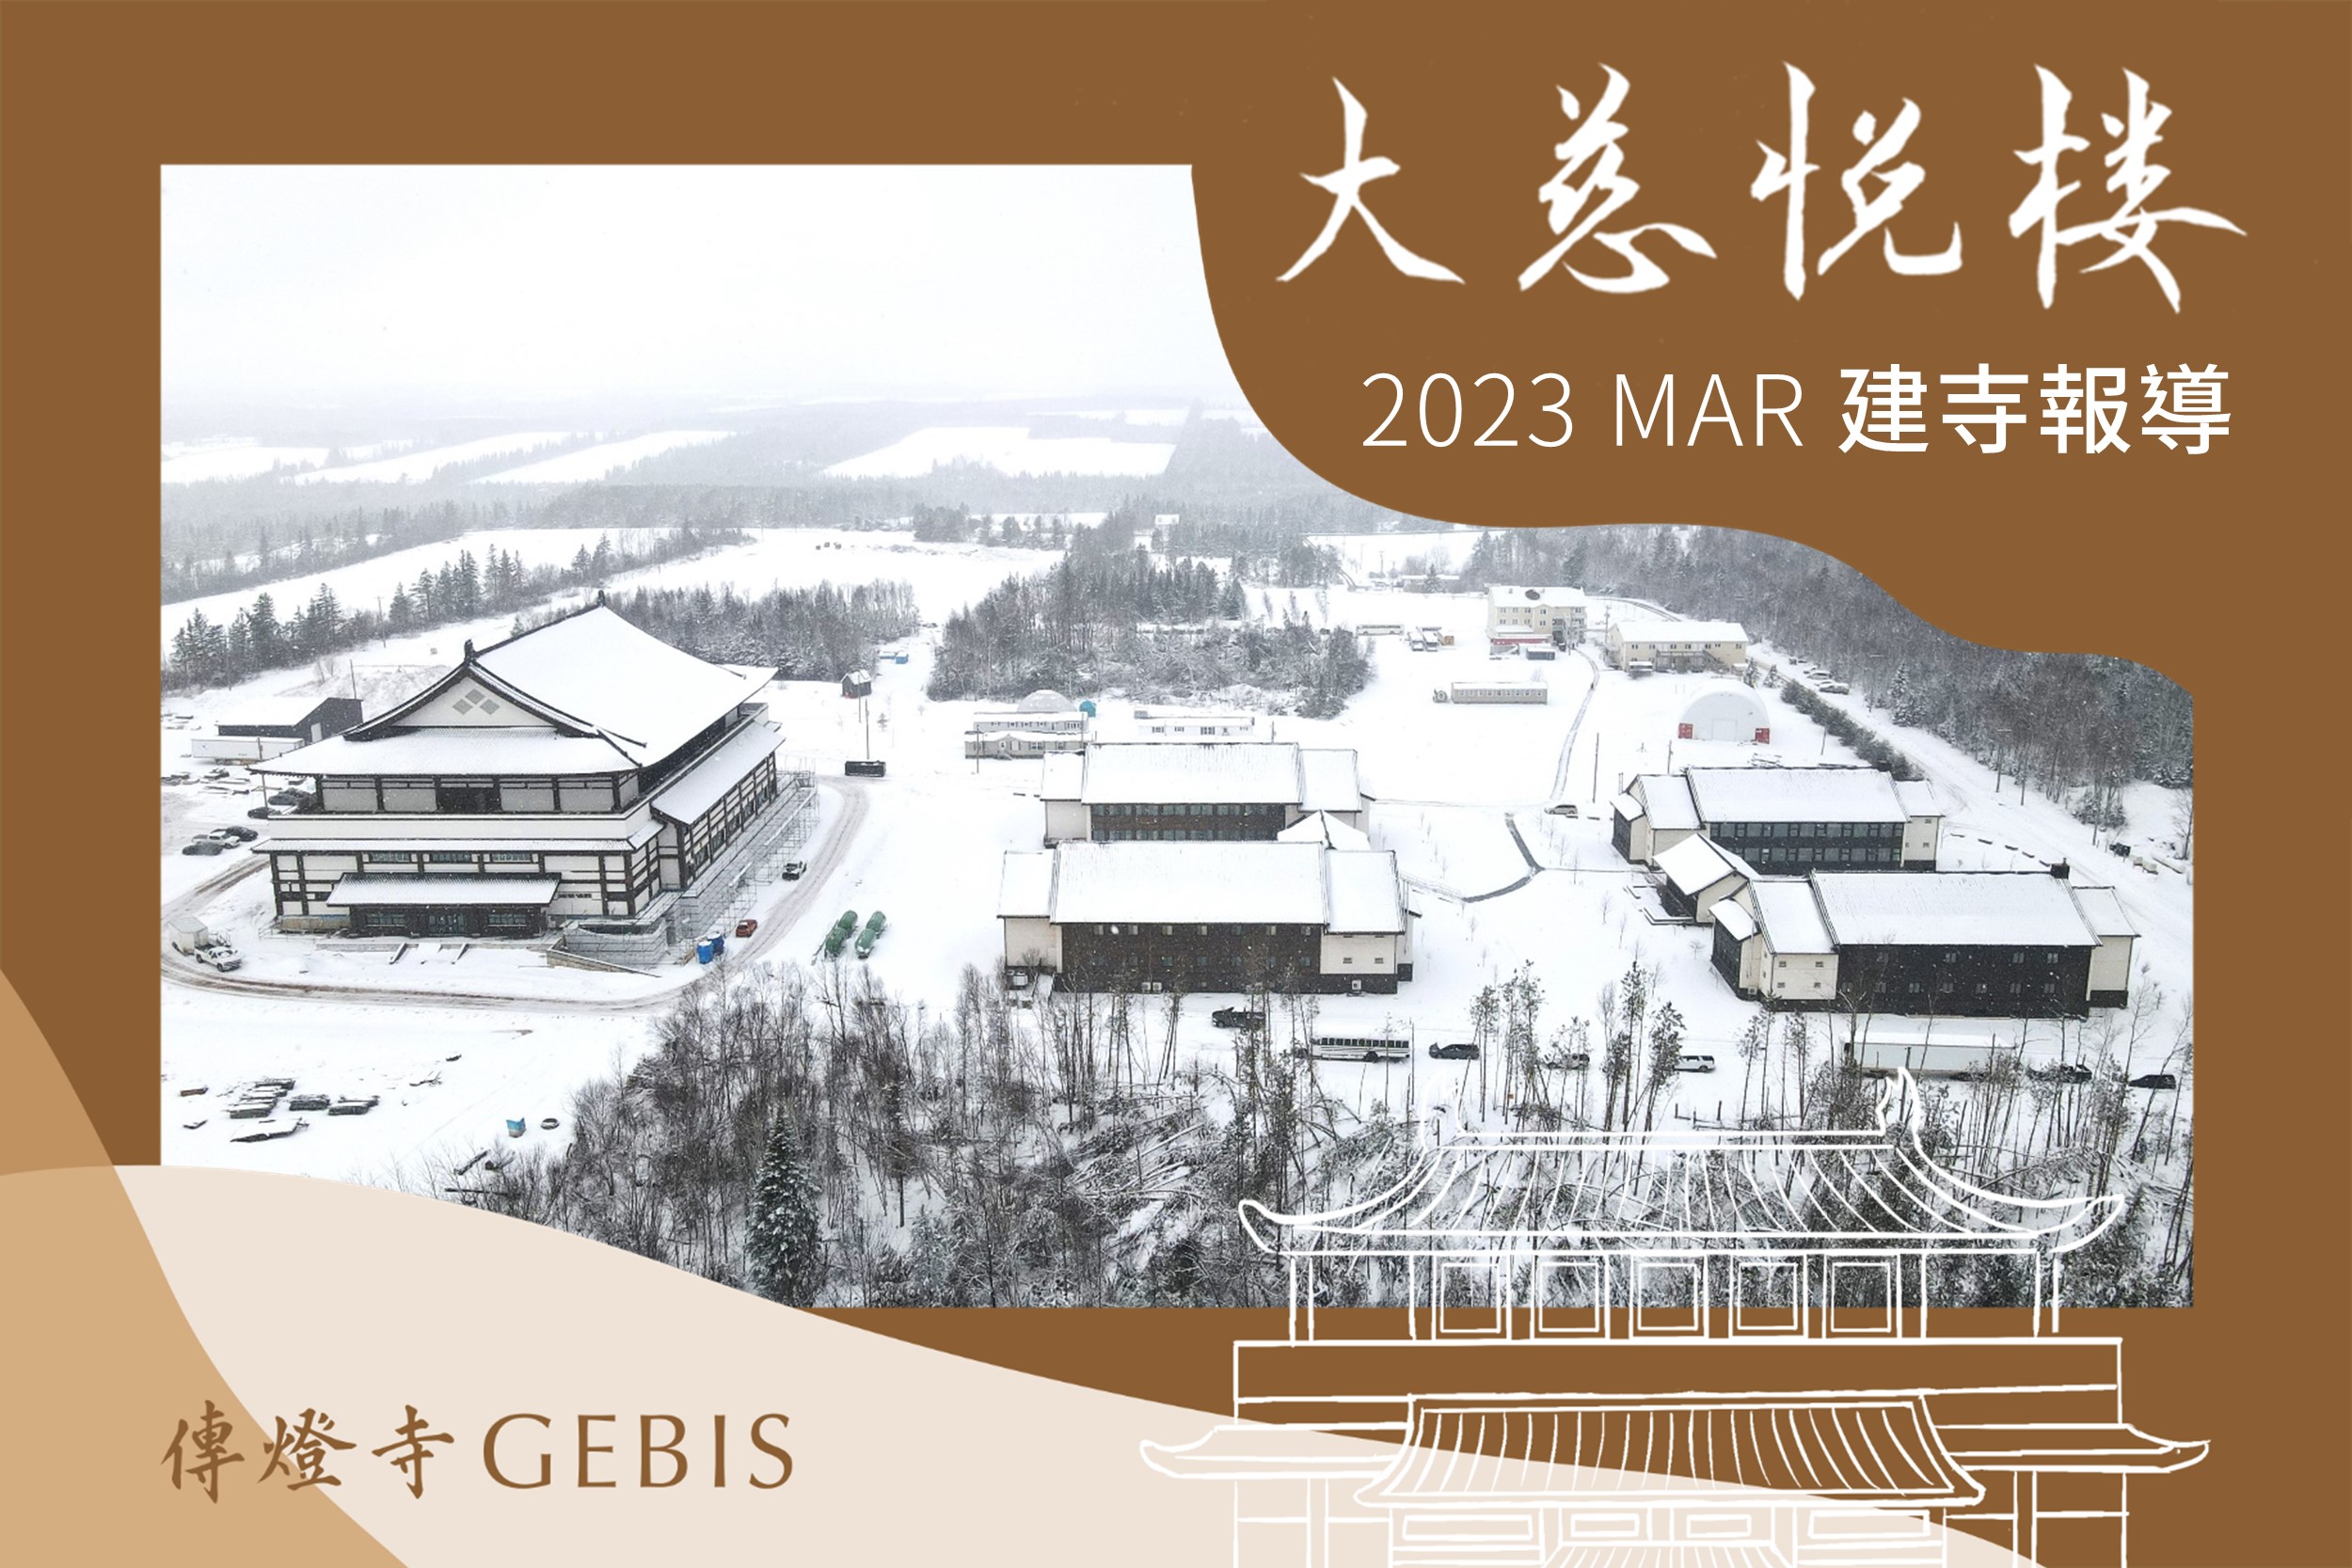 You are currently viewing 傳燈寺大慈悅樓：2023年3月建寺報導